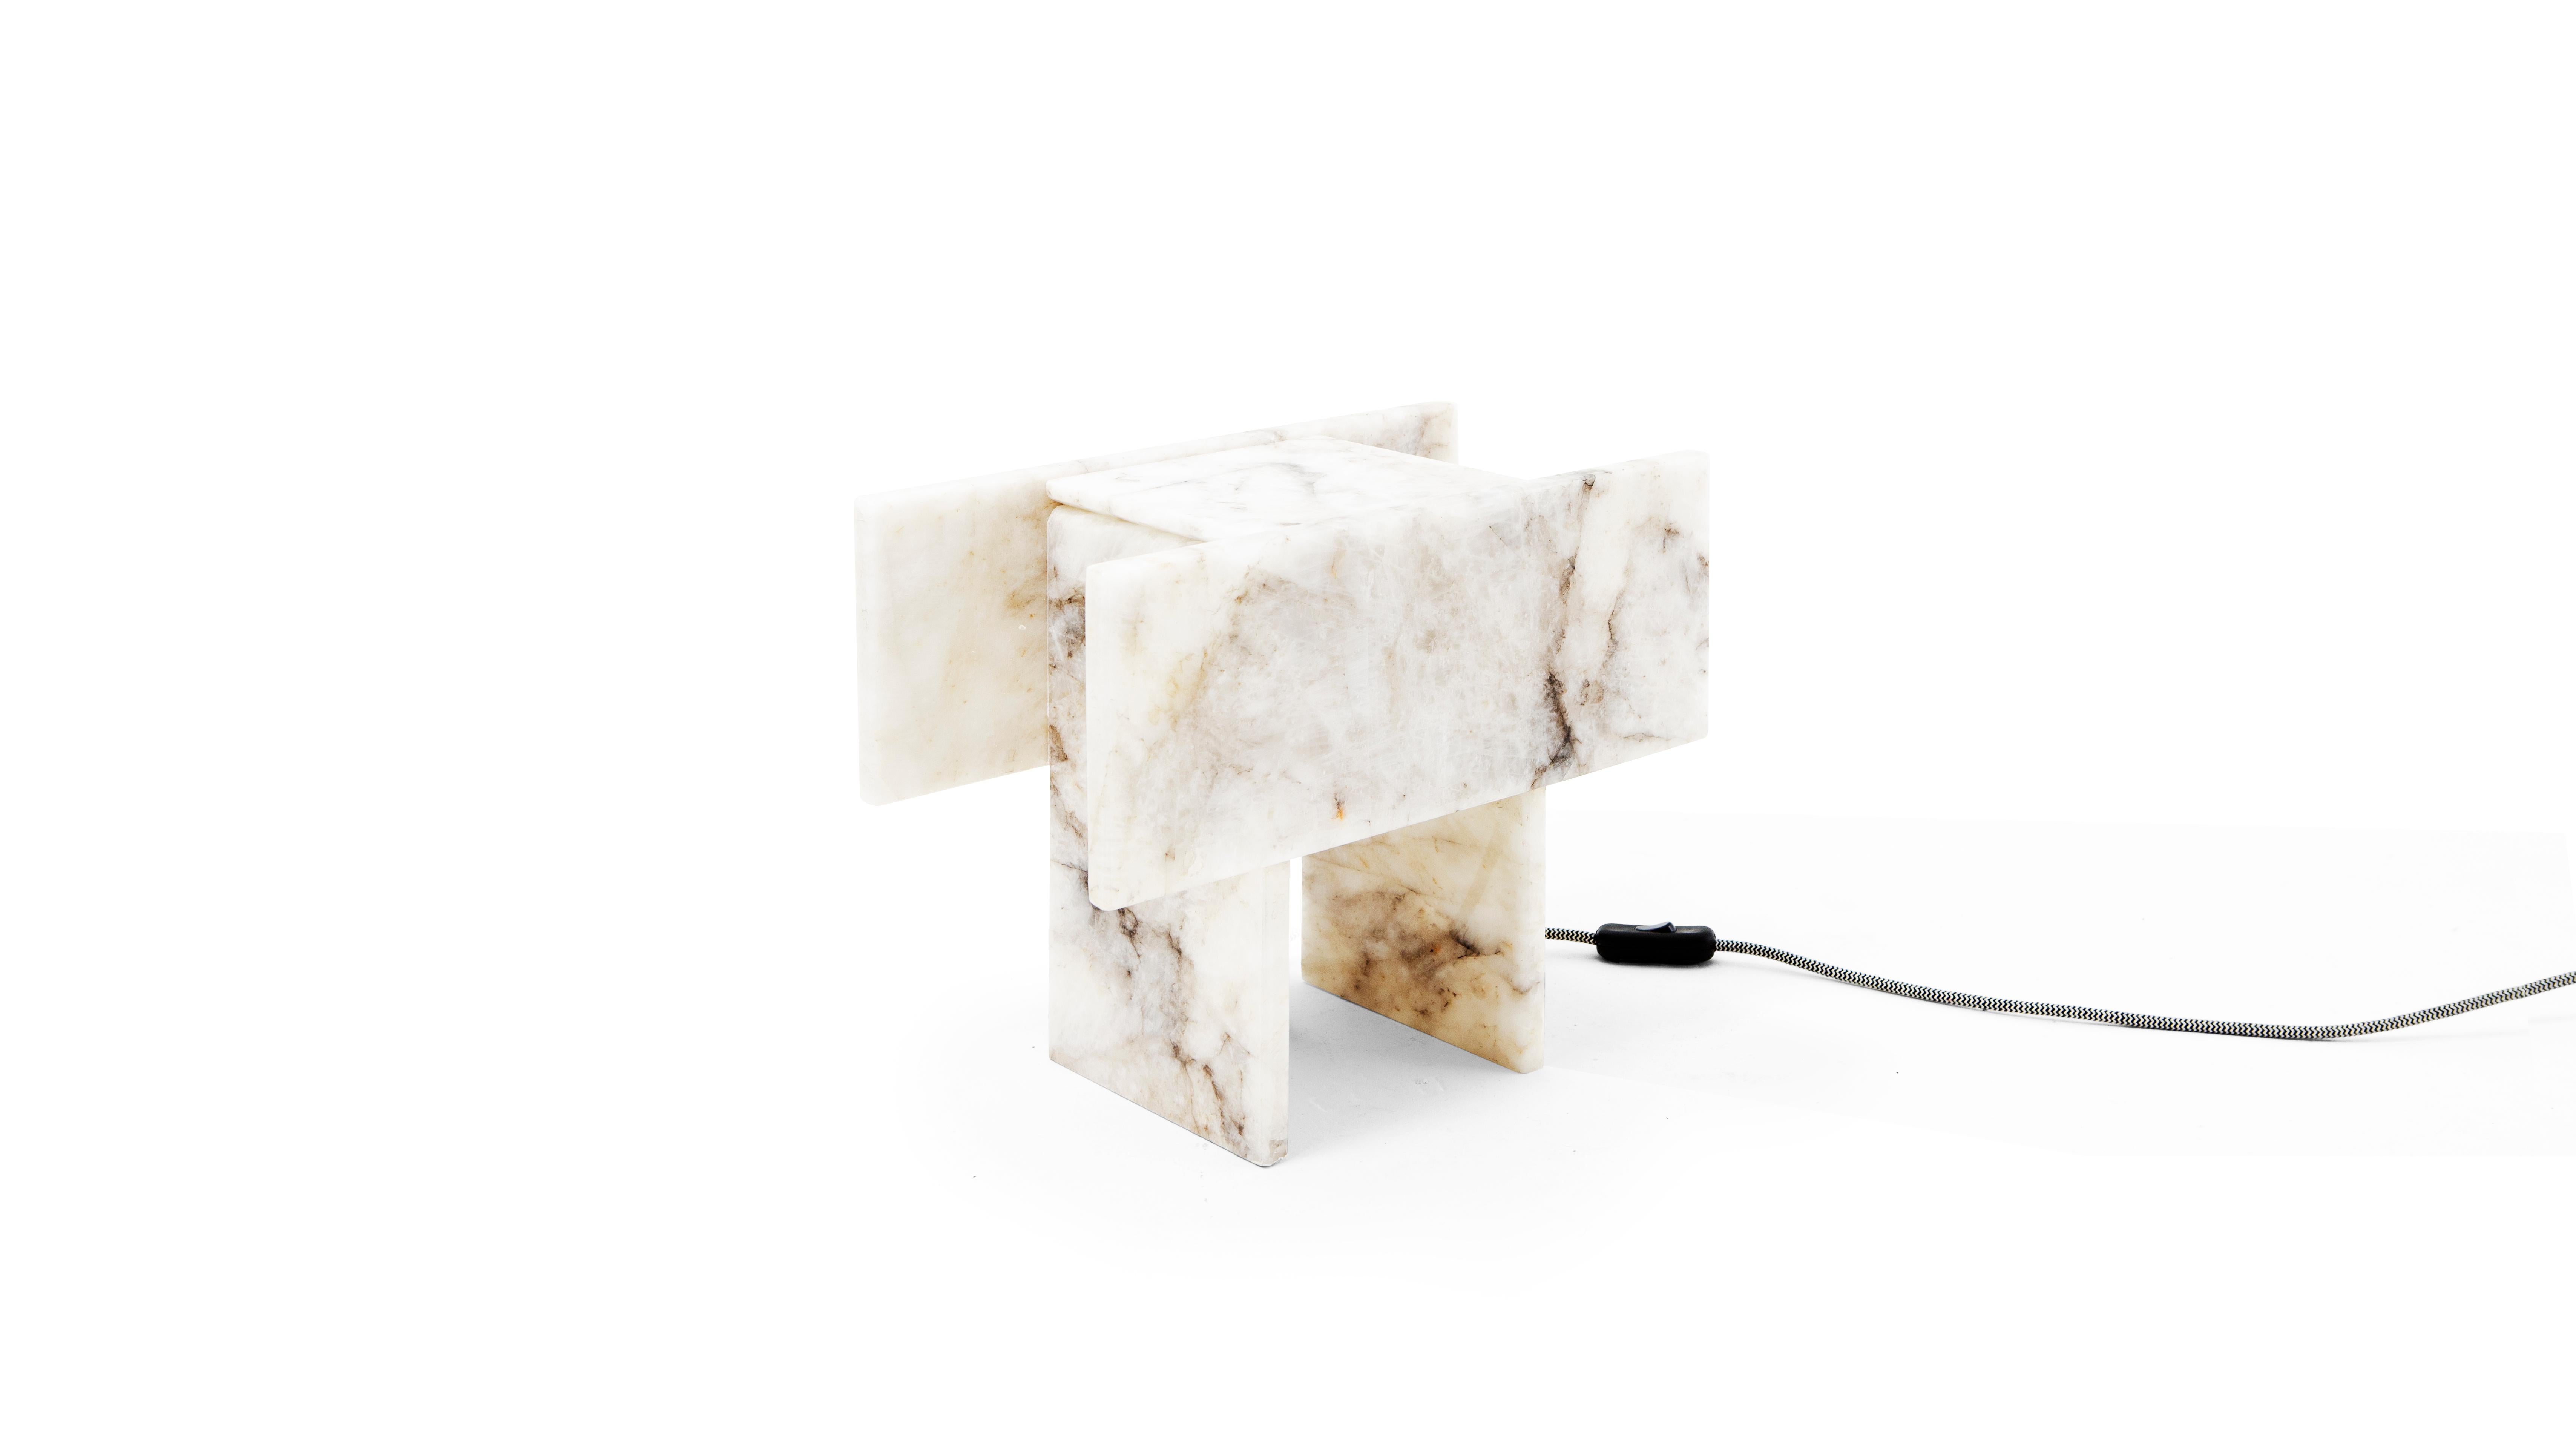 Pedrita lamp series’ concept is based on an experimentation of Brazilian stones: quartzites and quartz crystals, which are natural, semiprecious and exotic stones found in Brazilian territory.
We worked in a Minimalist perspective, using straight